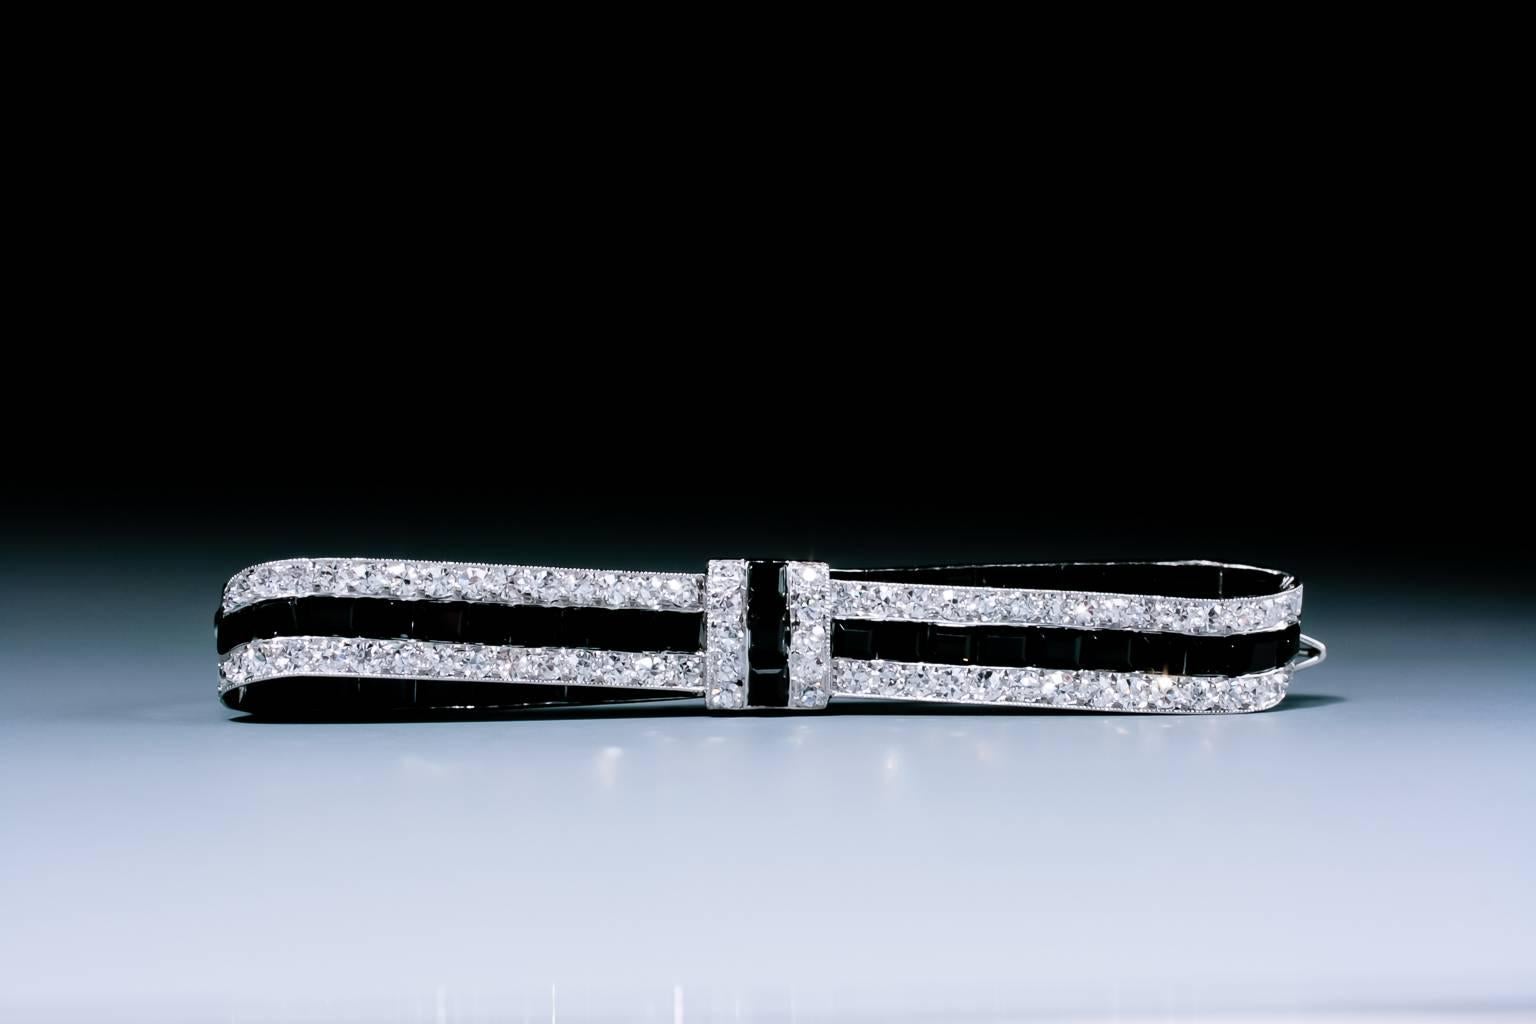 A very fine early Art Deco onyx and diamond bow brooch by Cartier, the horizontally aligned ribbon bow set with a central row of square cut onyx between courses of circular cut diamonds, backed on both sides with graduated calibré-cut onyx, mounted